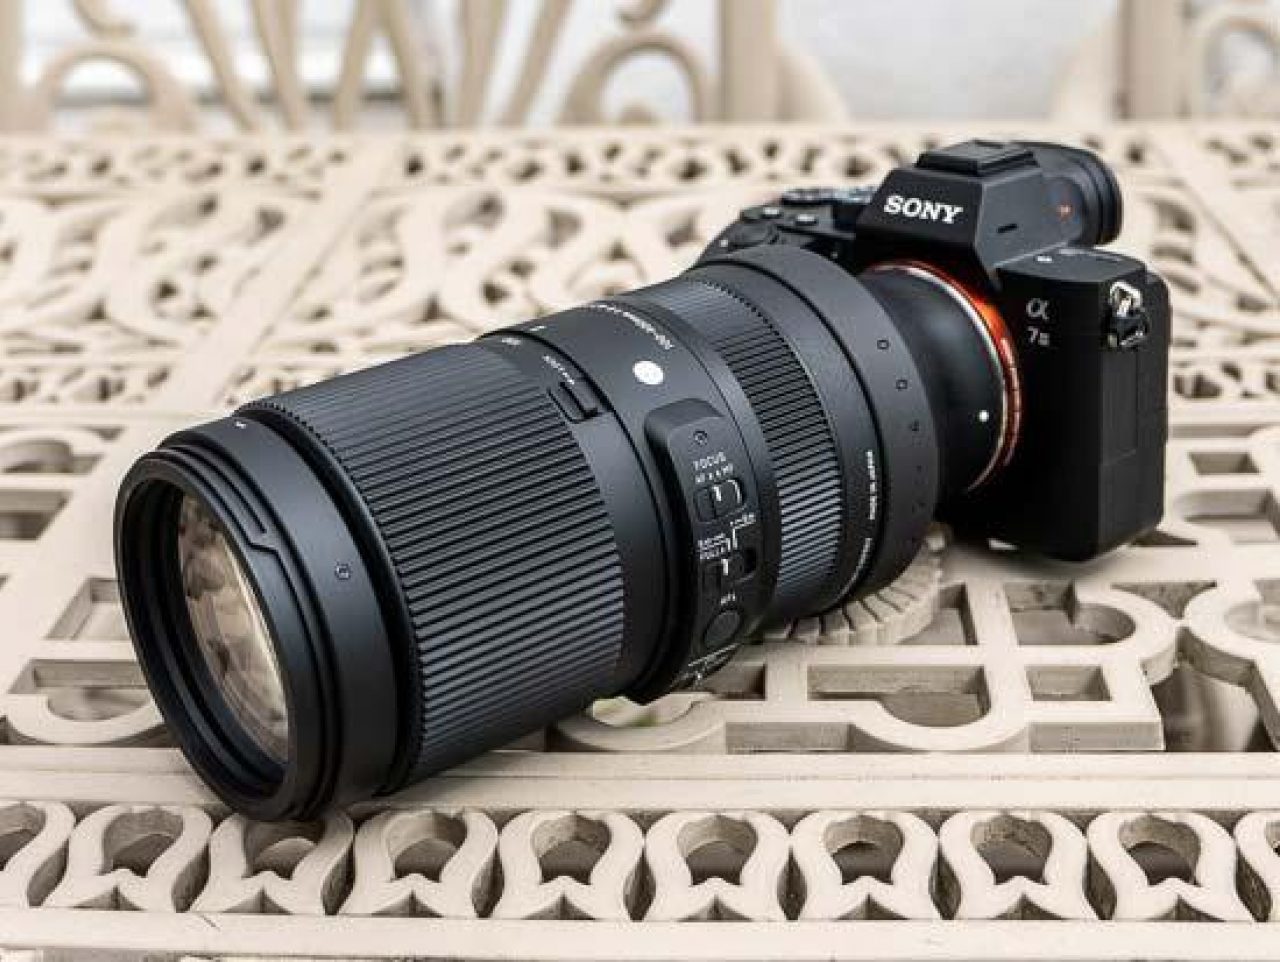 Sigma 100-400mm F5-6.3 DG DN OS Review - Specifications 